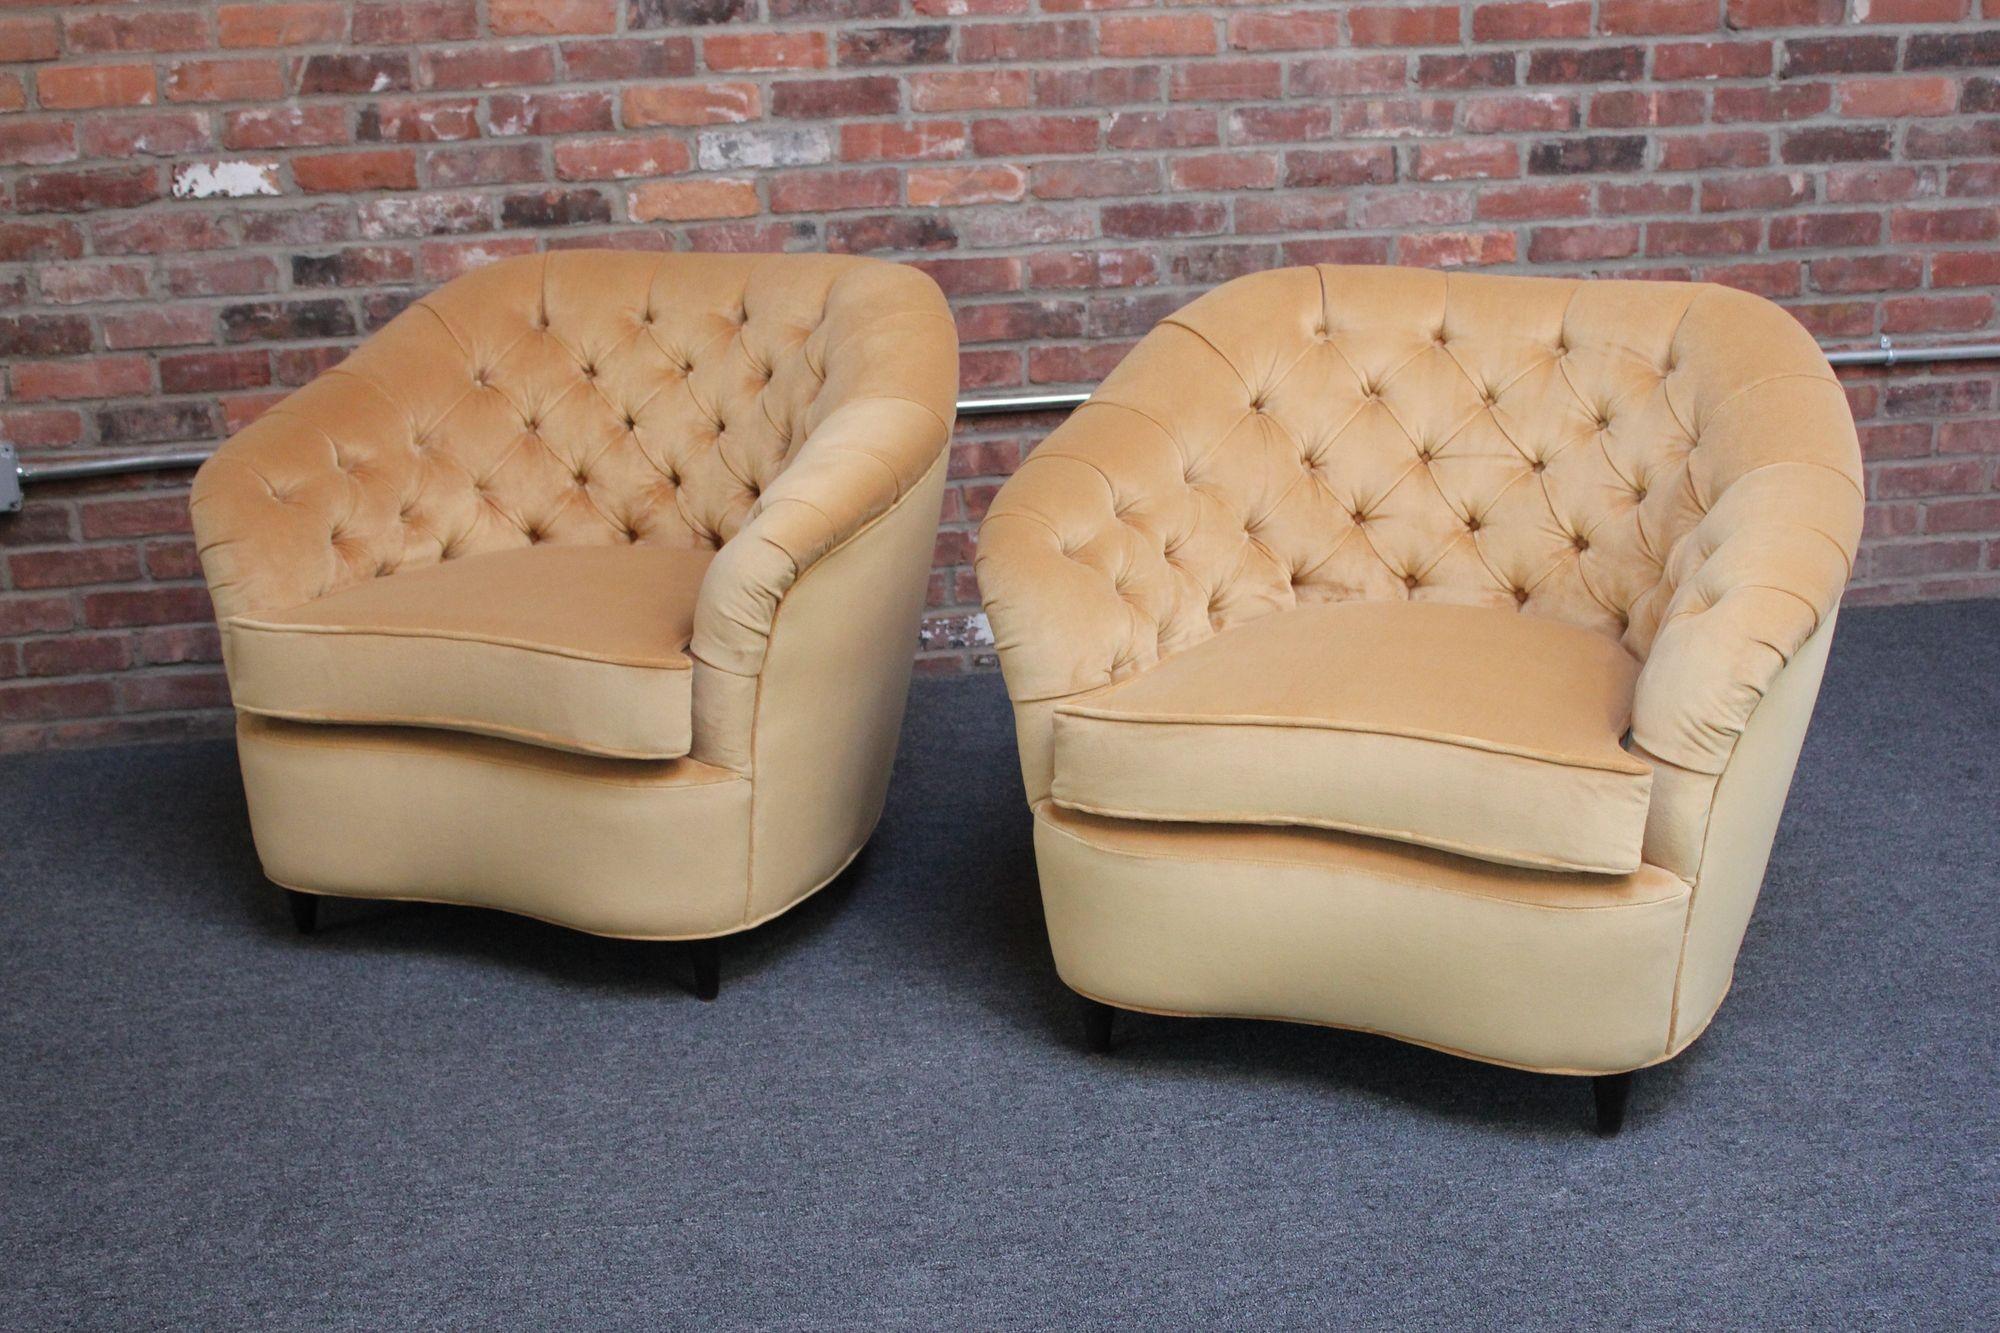 Pair of Gio Ponti for Casa E Giardino club chairs newly reupholstered in Kravet butterscotch velvet (36111-416) with button-tufted detail (ca. 1938, Italy). Sculptural form with spacious seat and elegant curvature to the frame.
Excellent, restored